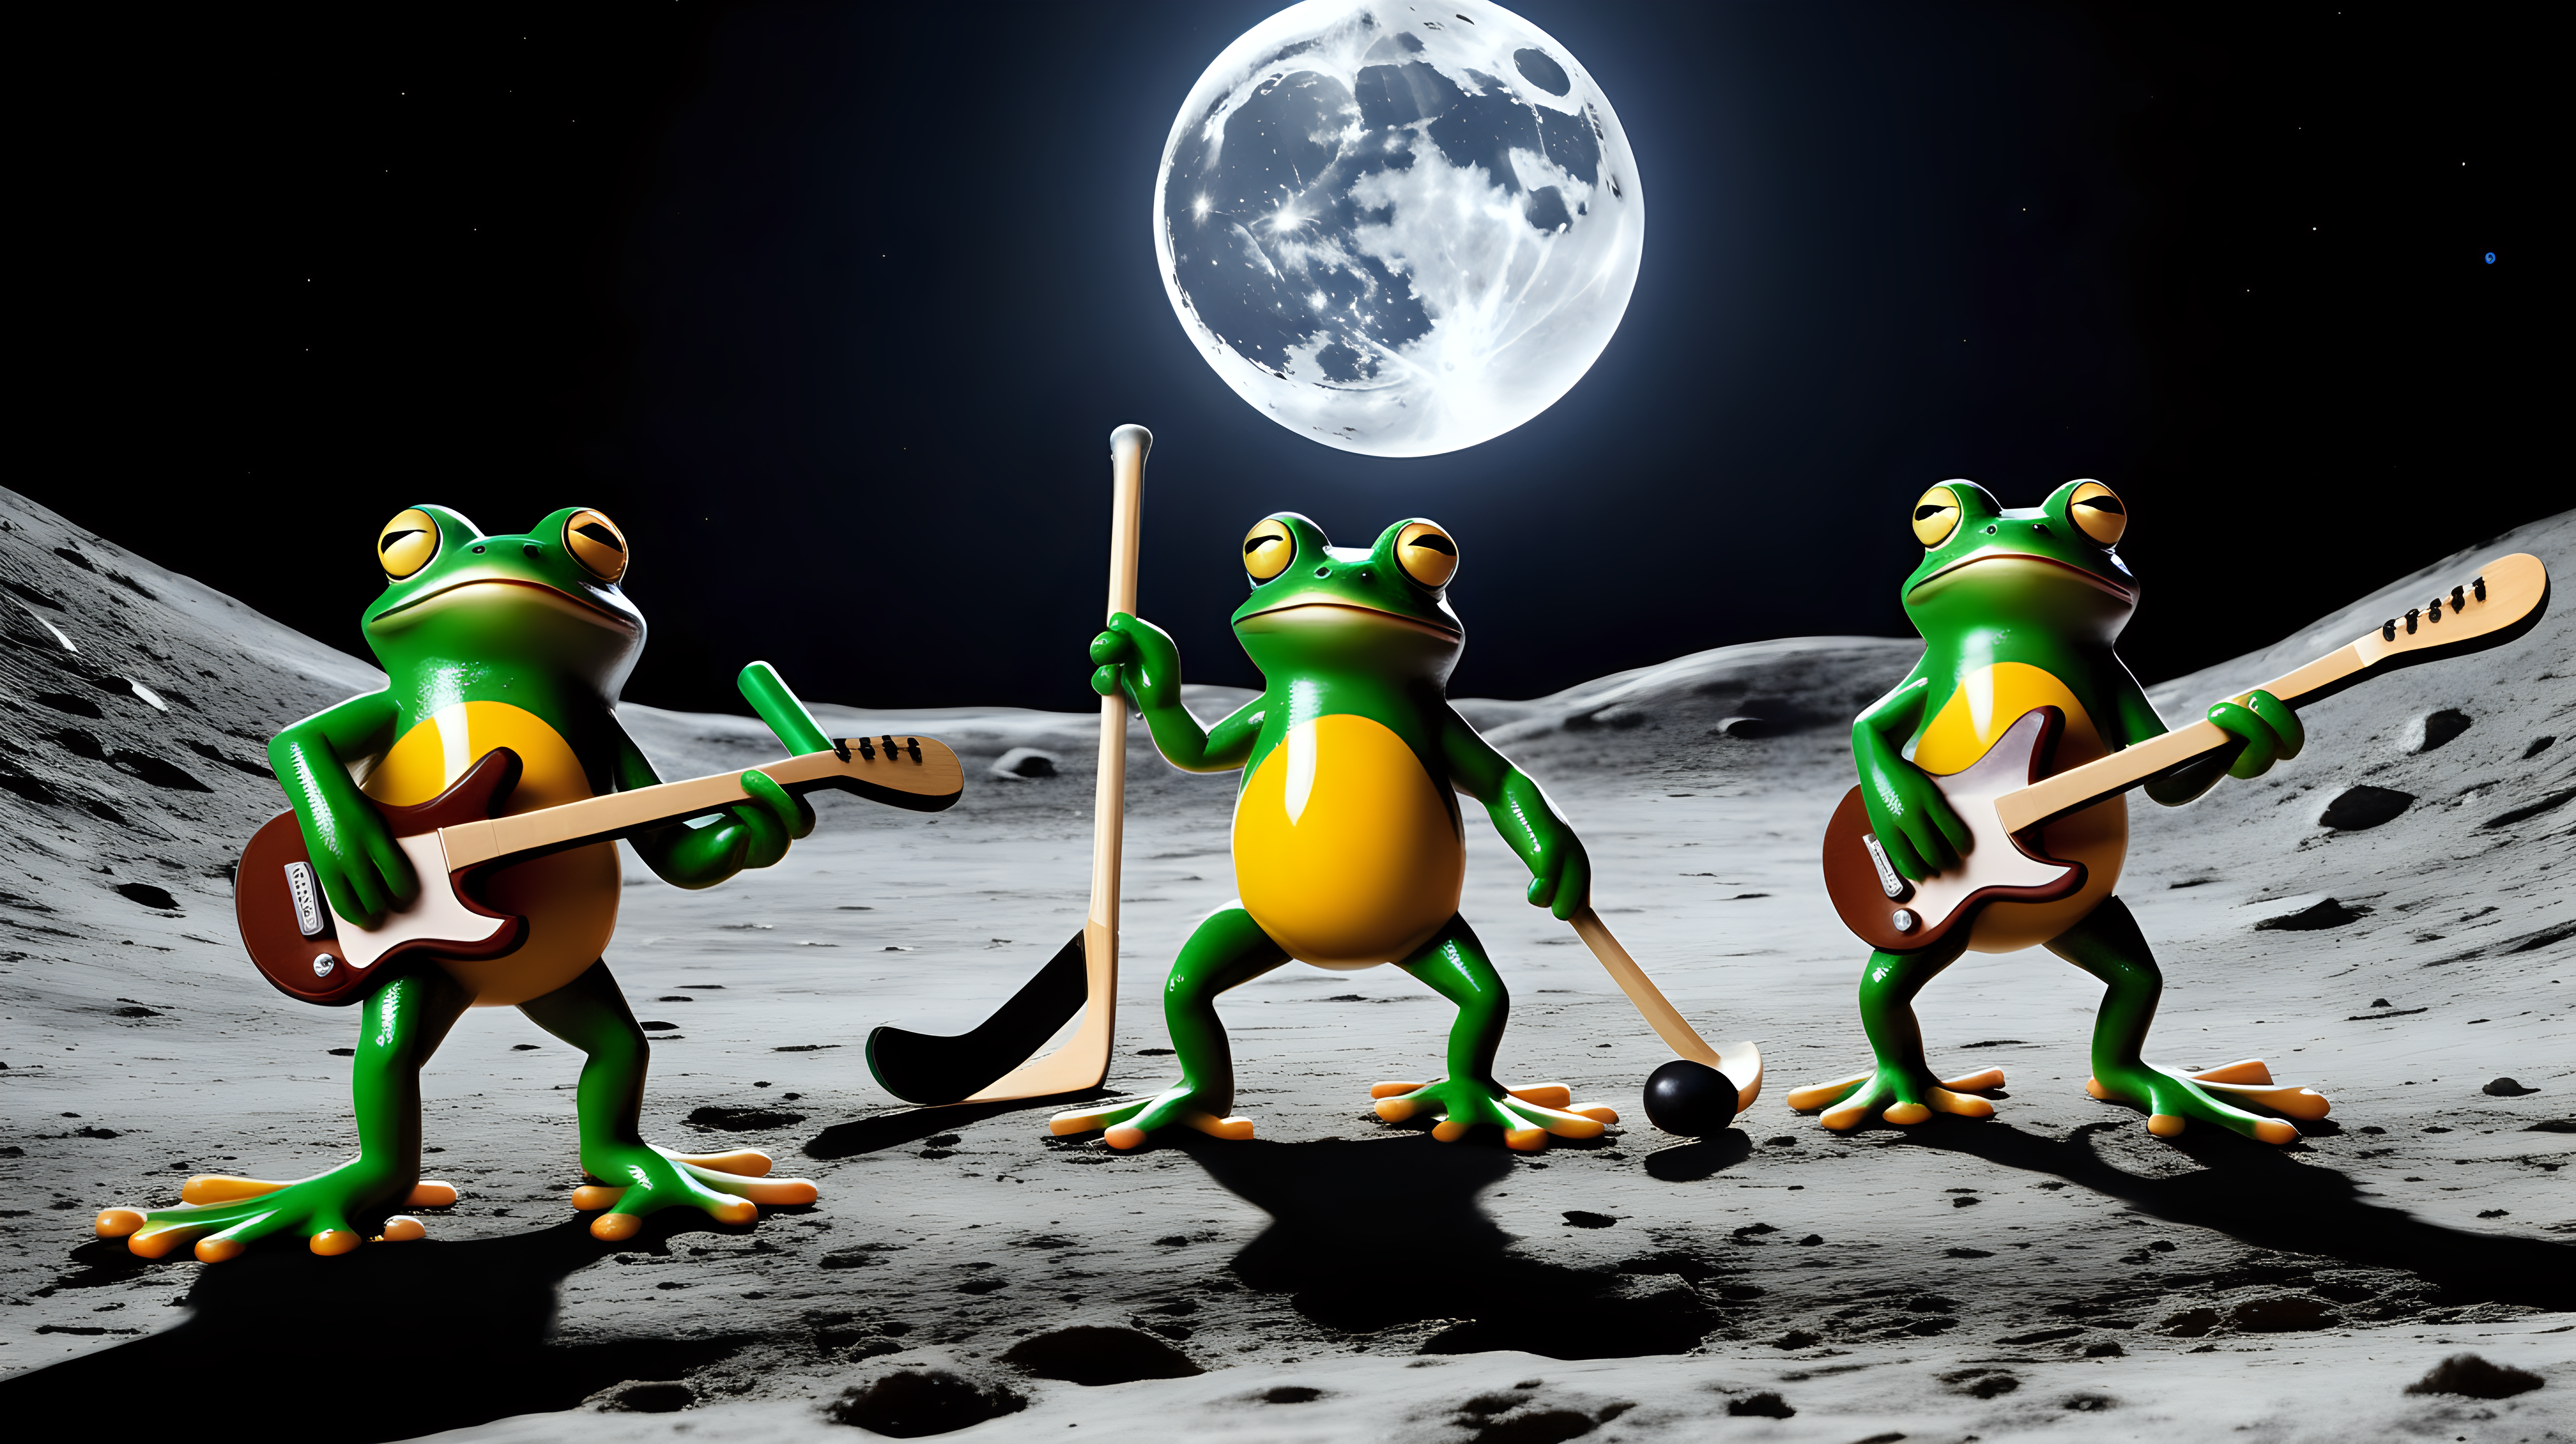 frogs playing hockey on the moon